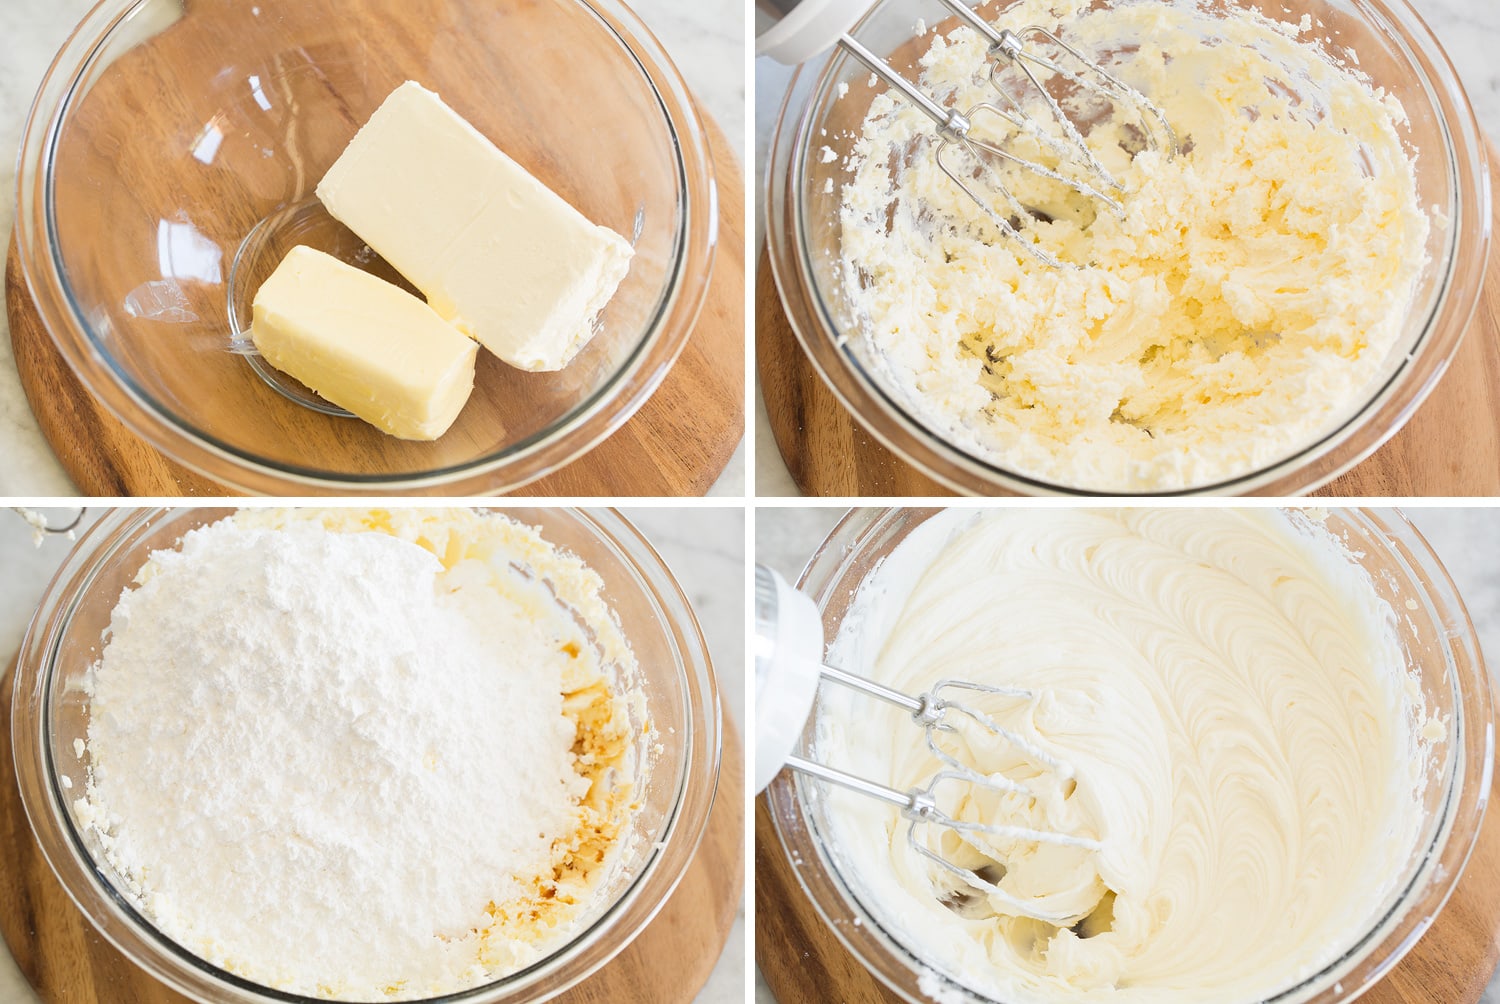 Steps of making cream cheese frosting from scratch.